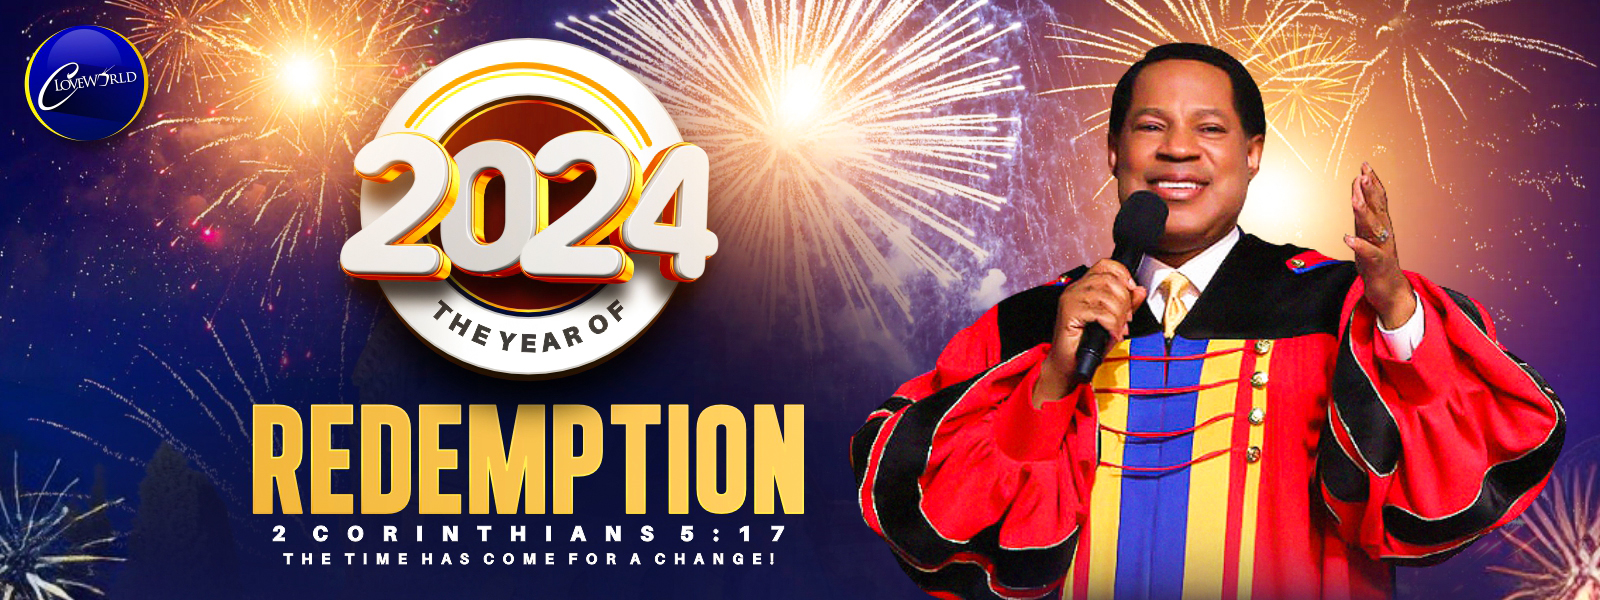 THE YEAR OF REDEMPTION 